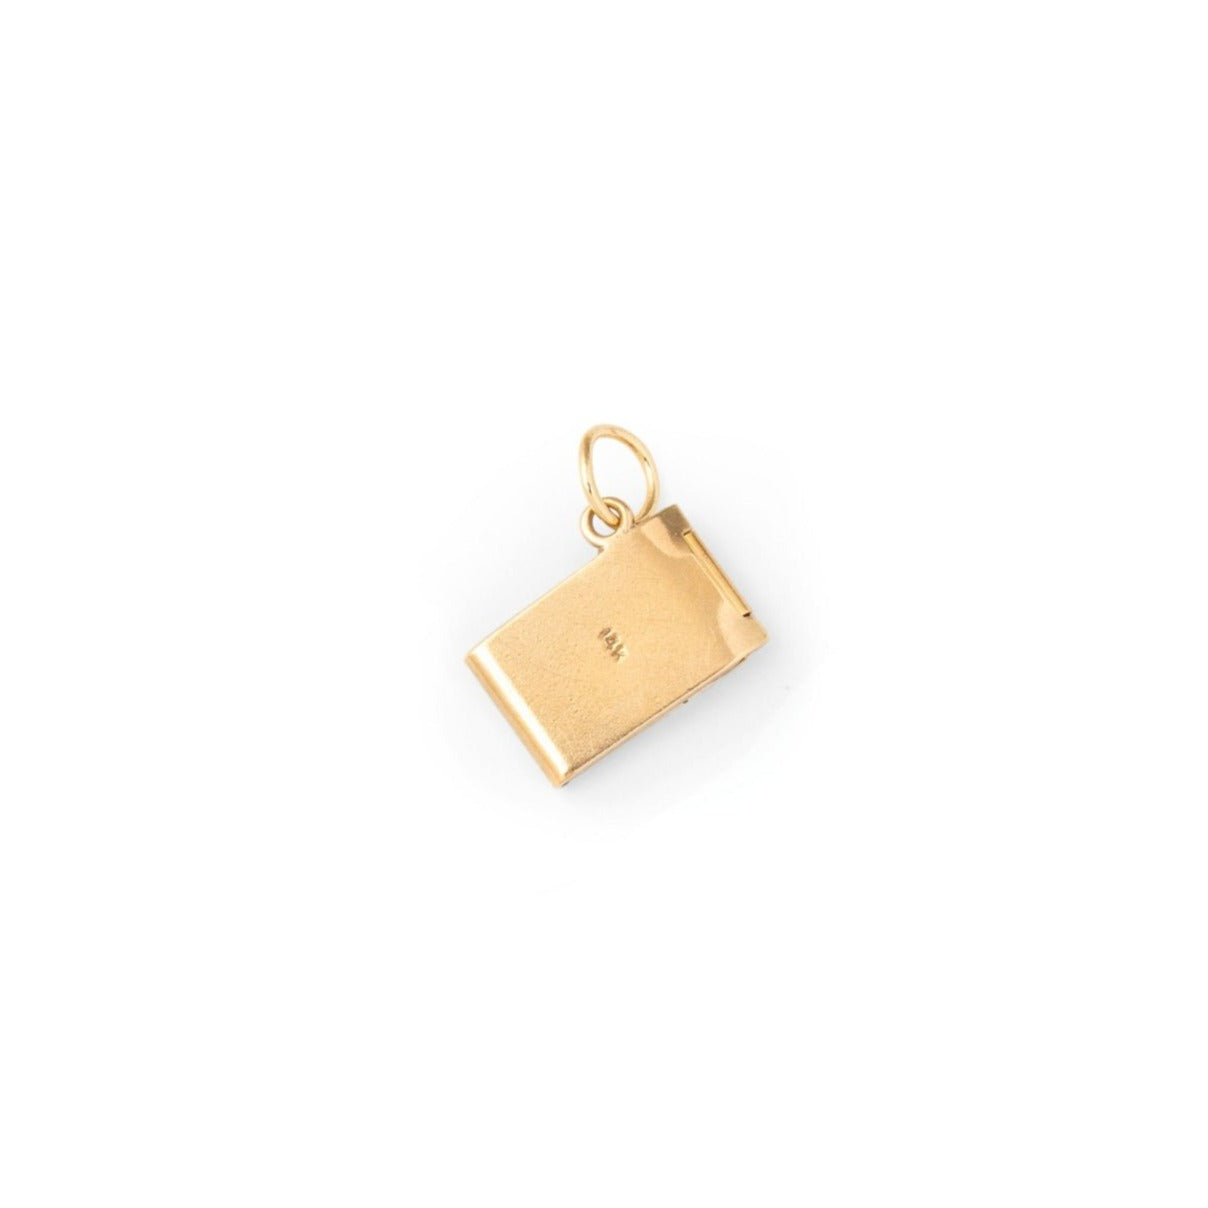 Movable Book Of Matches 14k Gold Charm